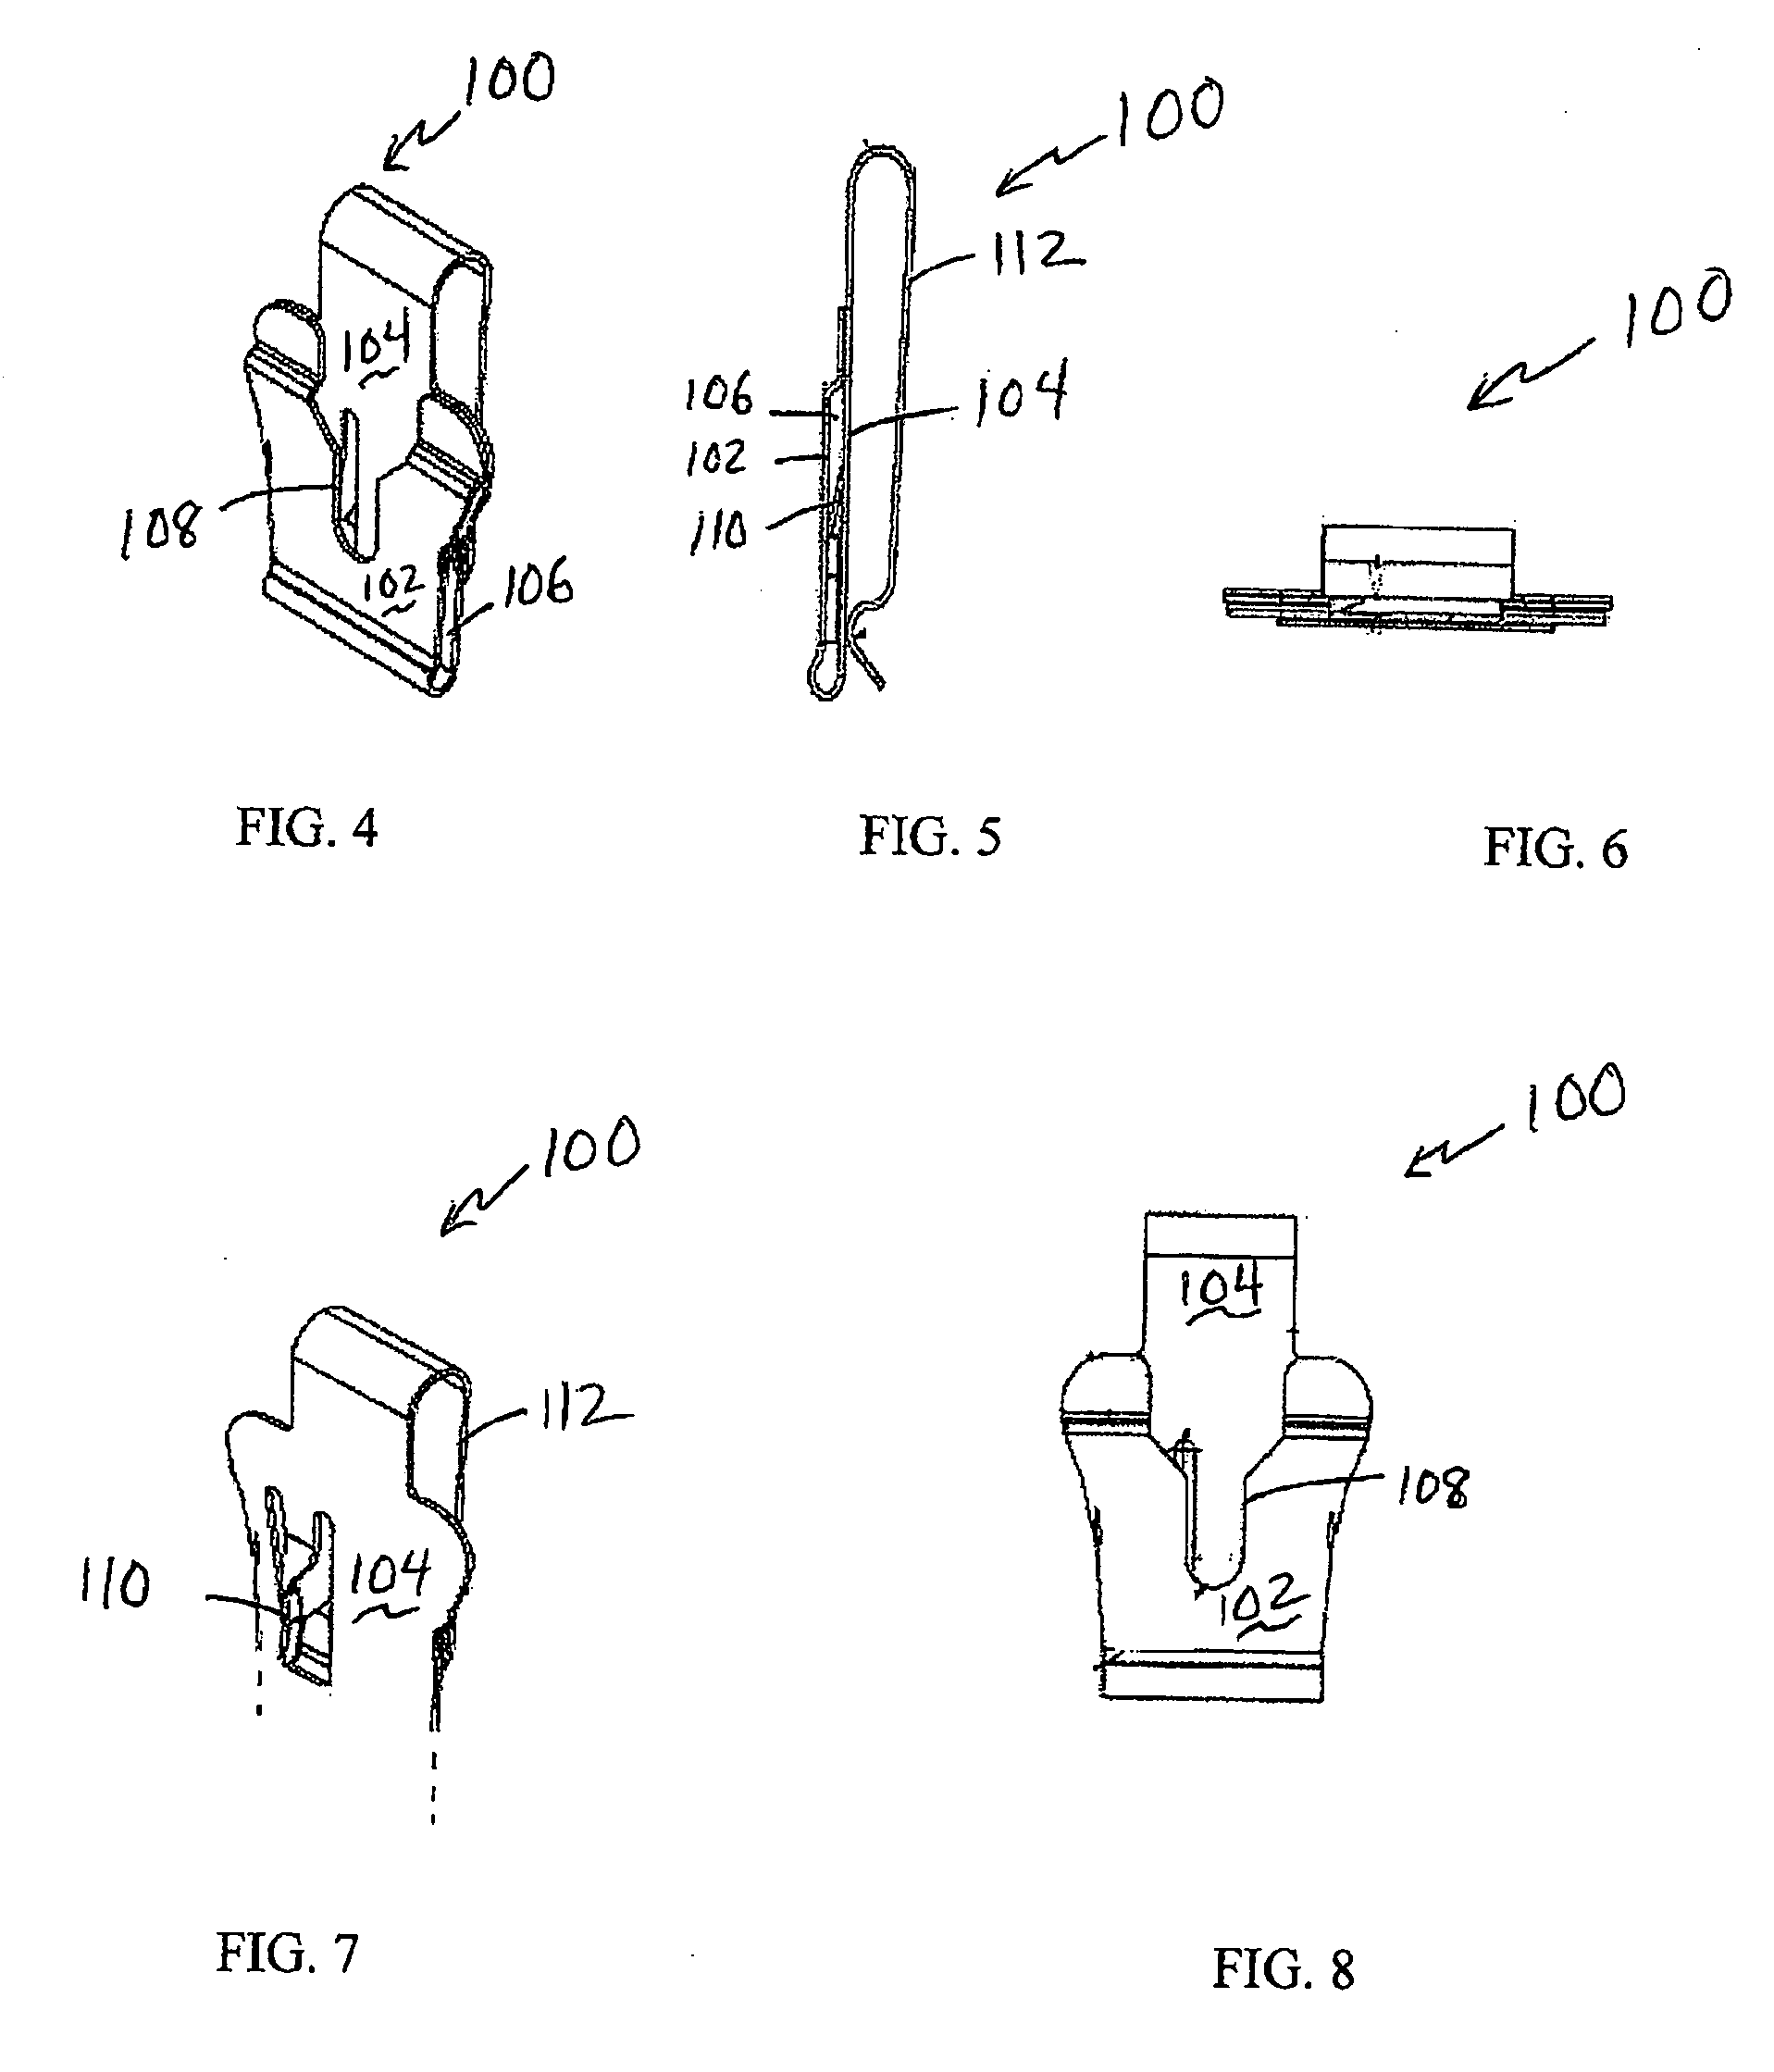 One-piece connecting or fastening apparatus inexpensively and simply manufactured